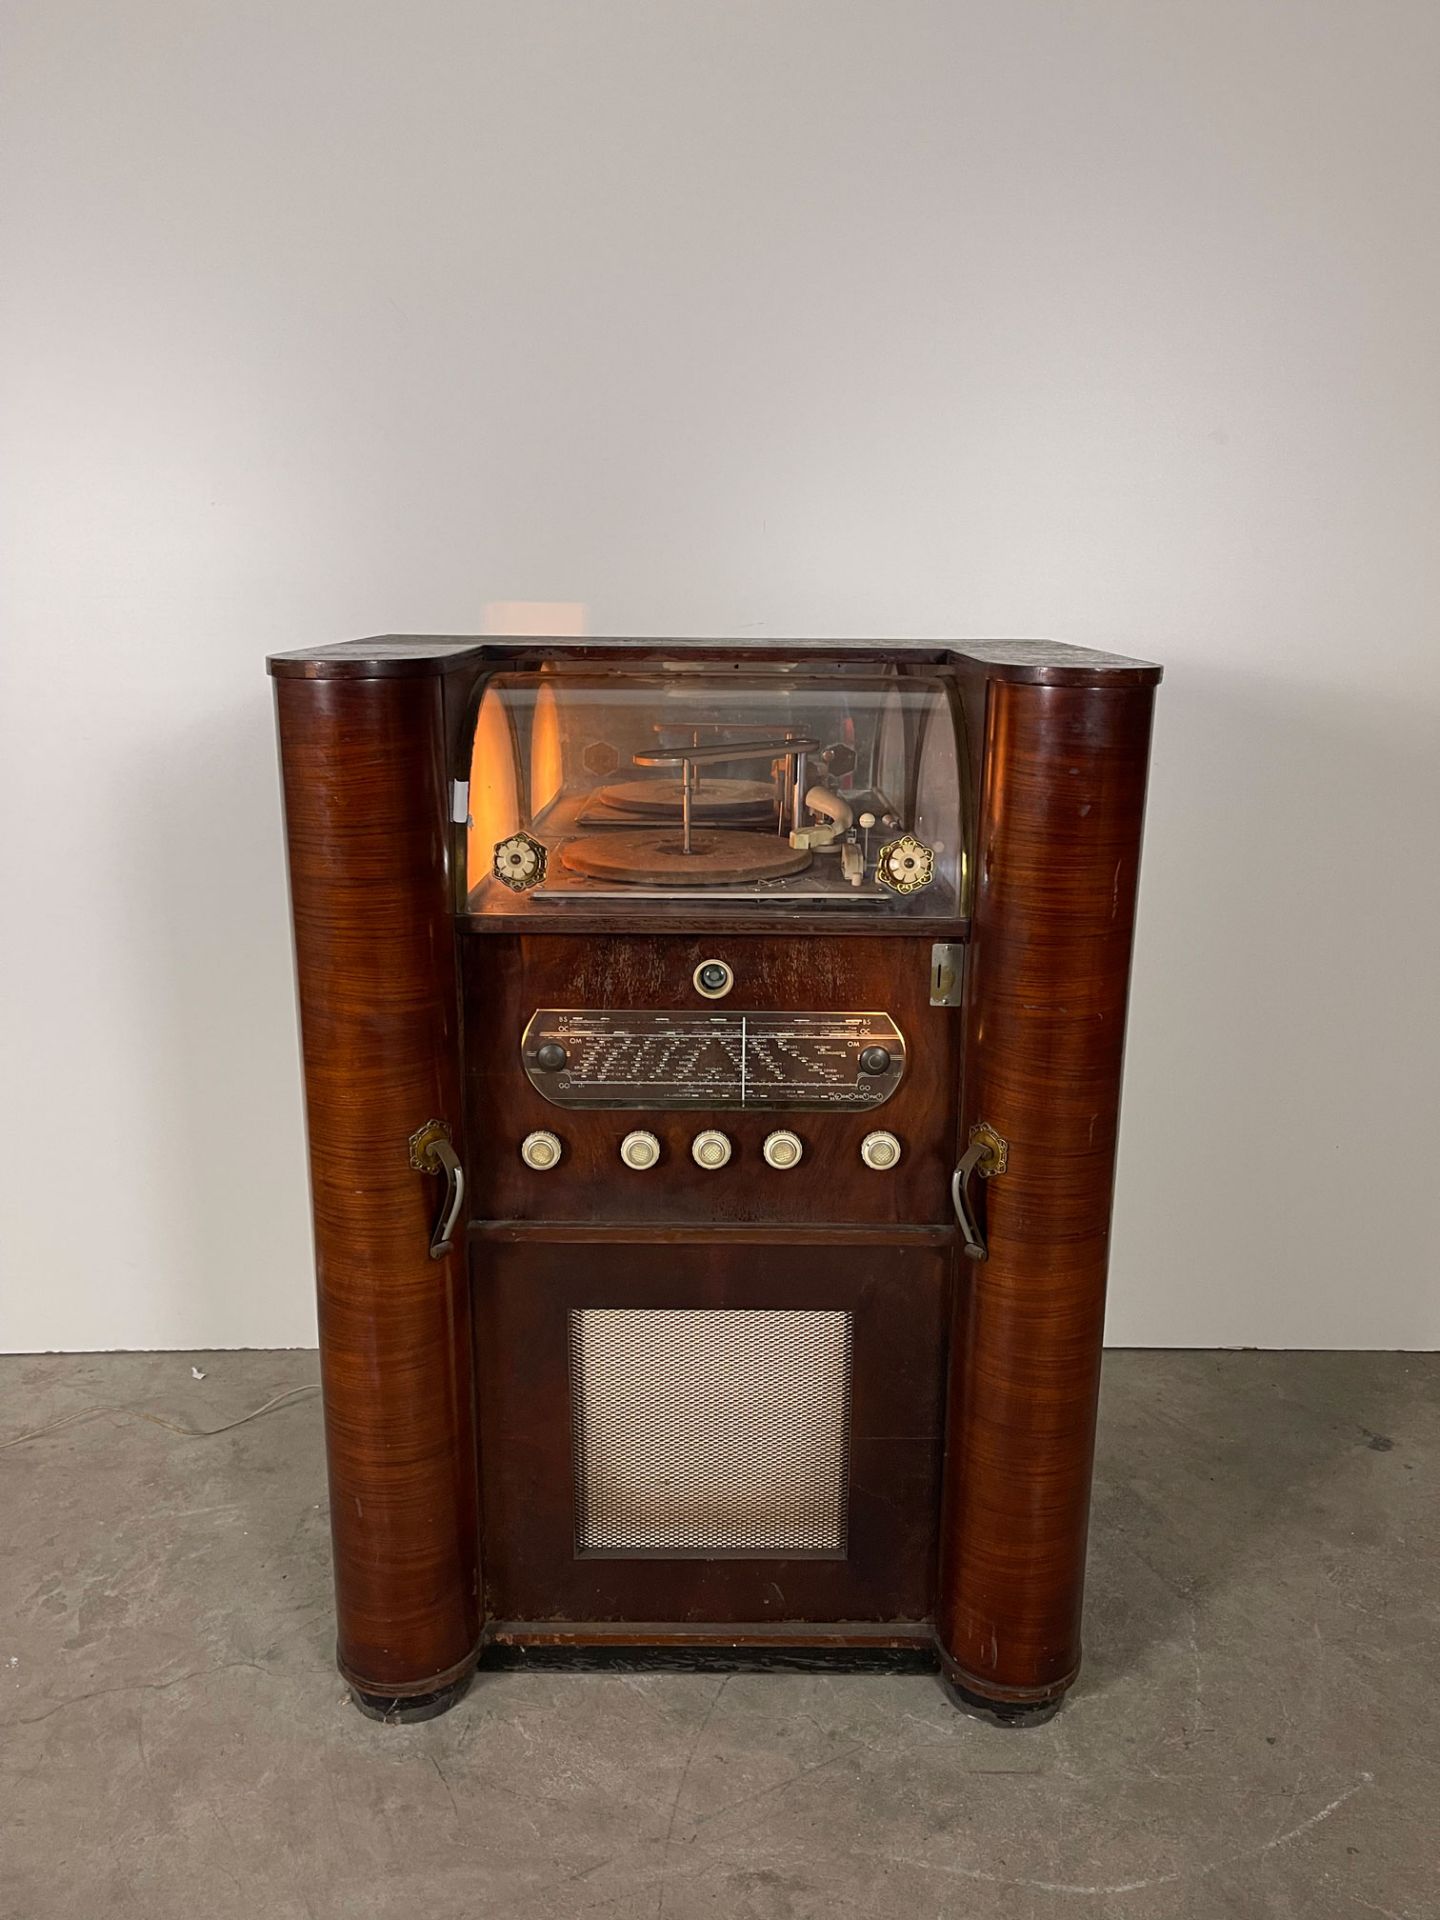 Mid-Fifties Valcke Heule Belgian Coin-Op Radio & Record Player - Image 4 of 15